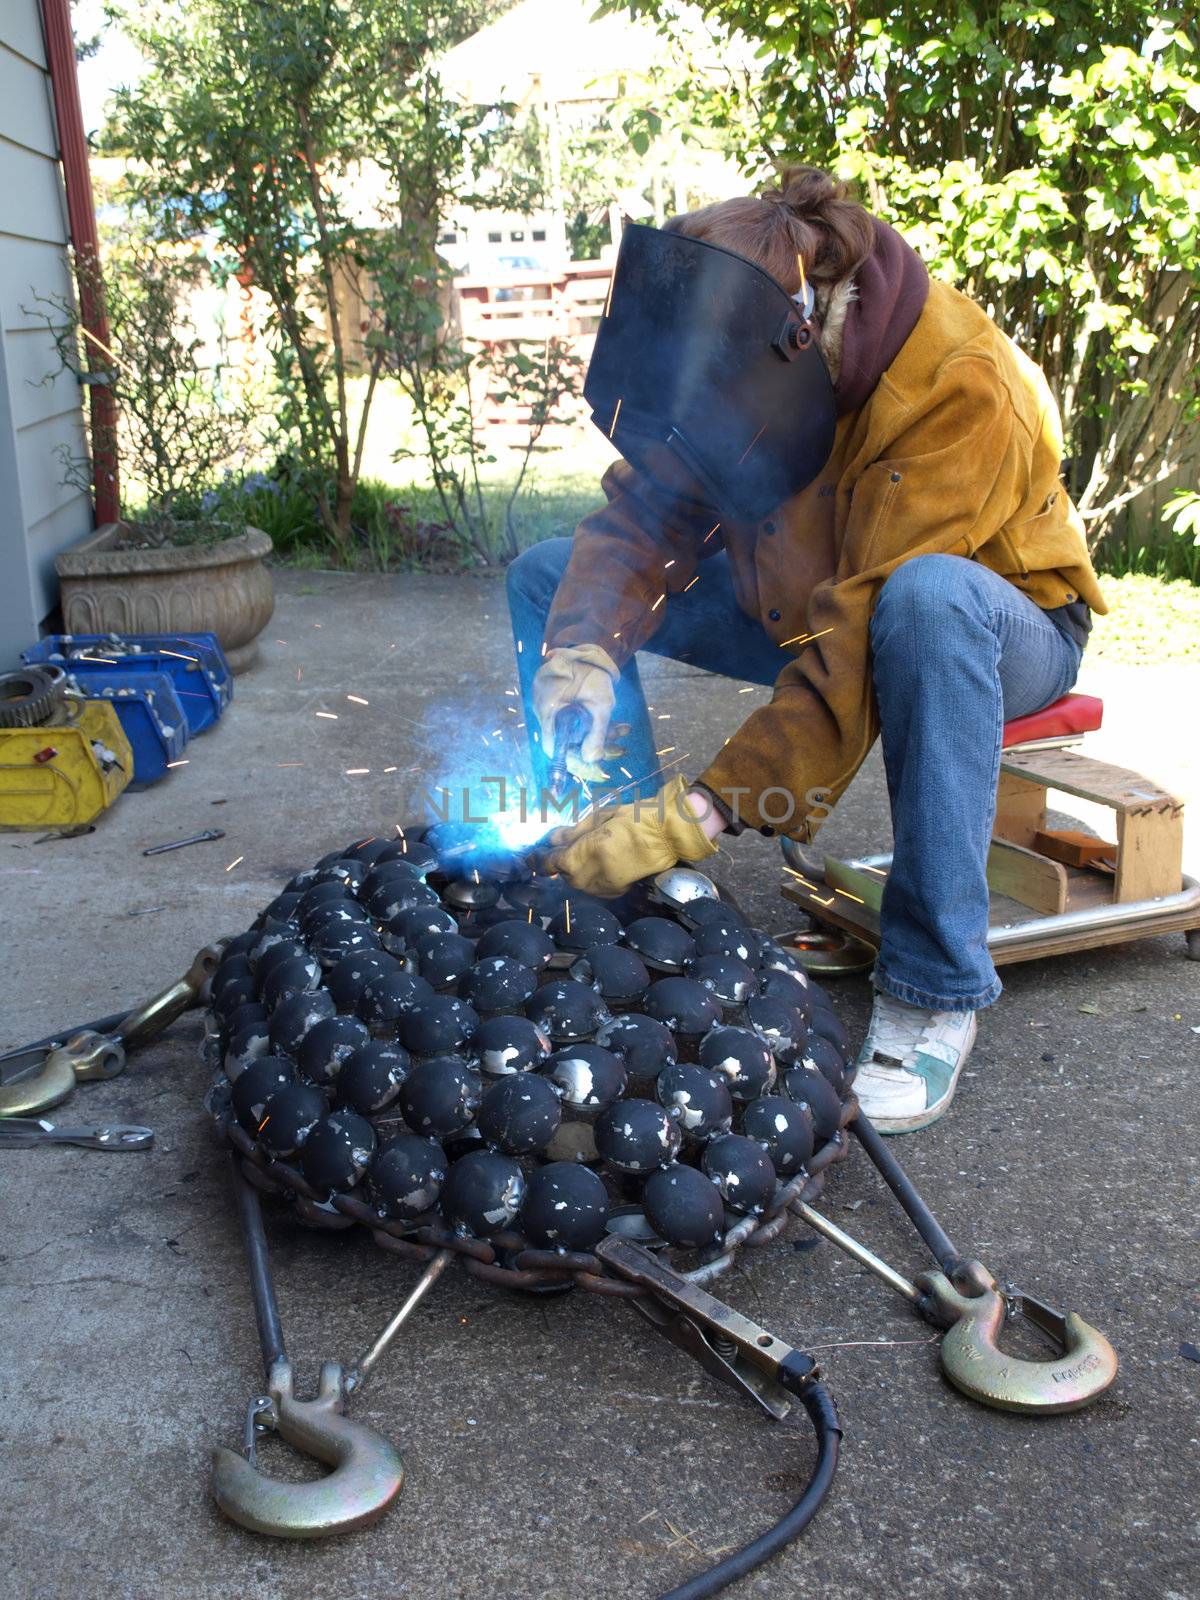 A woman wearing protective gear welds a metal art sculpture together.